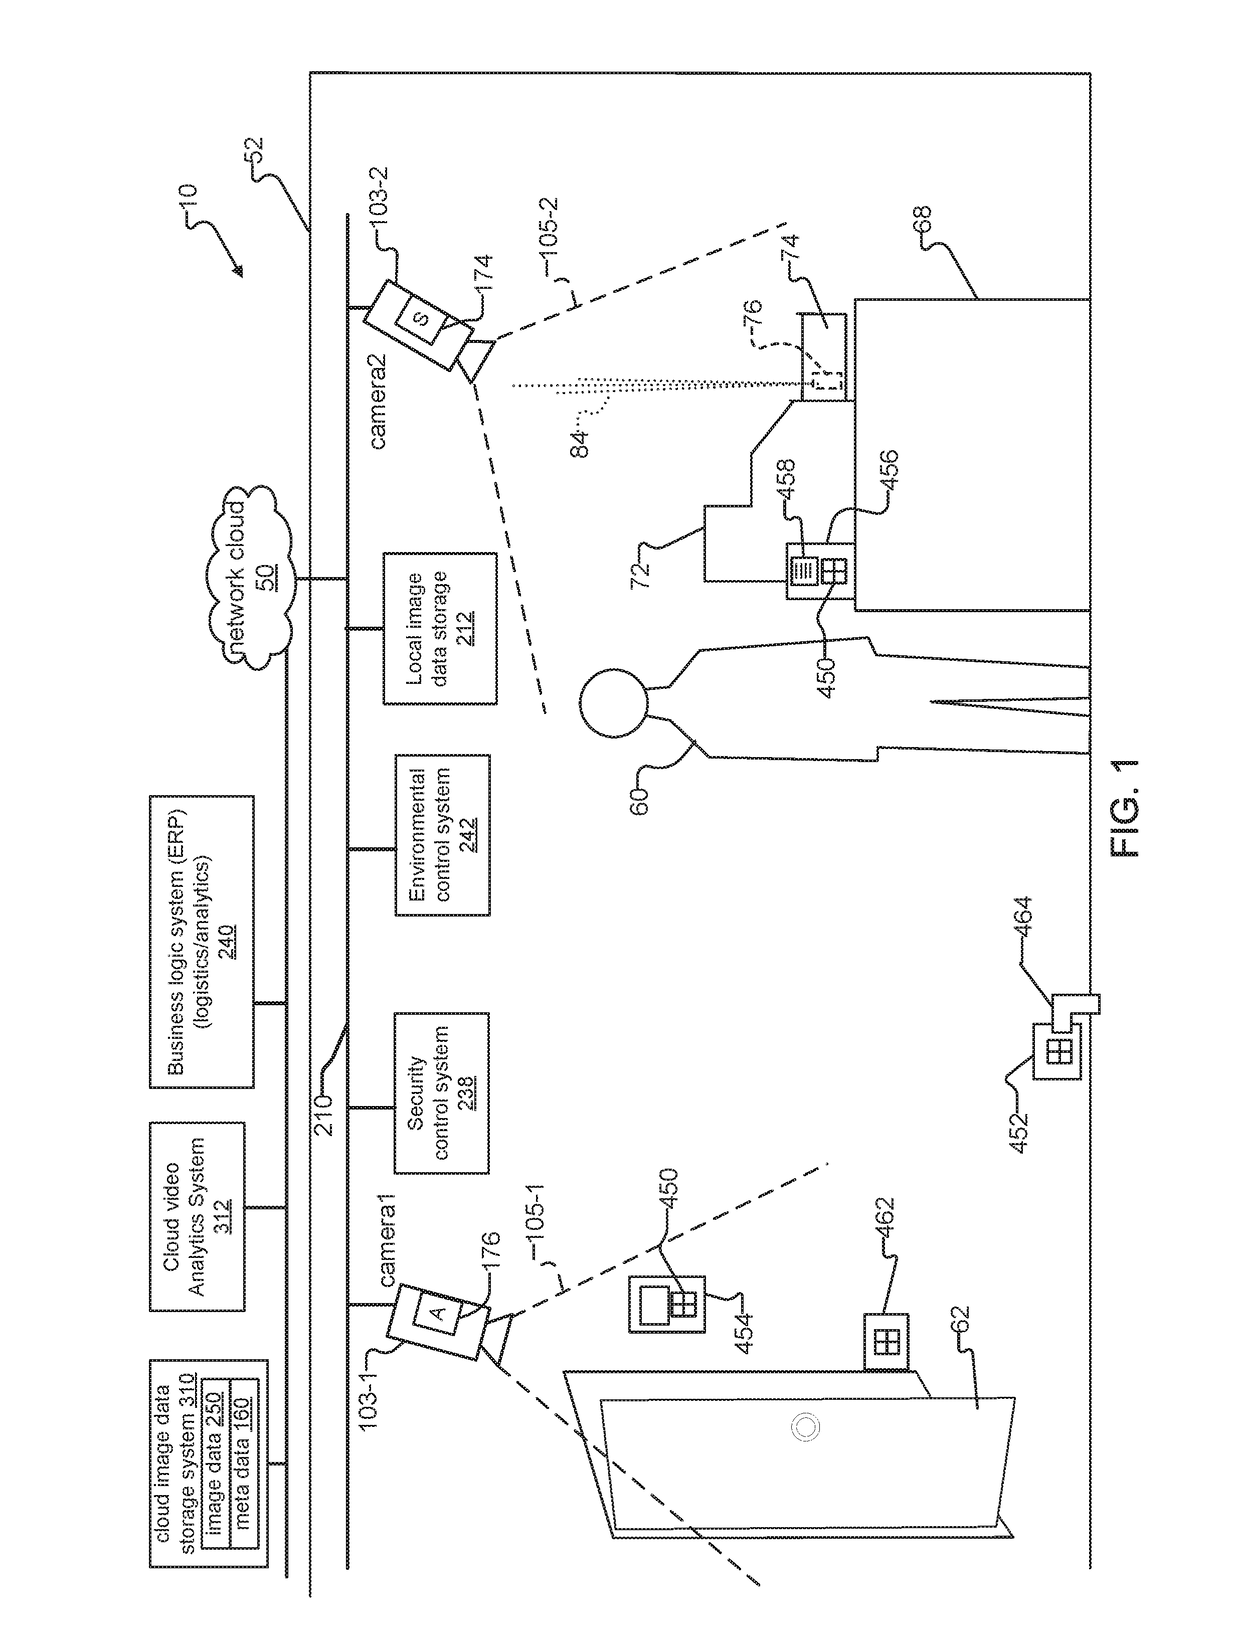 Method and system for conveying data from monitored scene via surveillance cameras